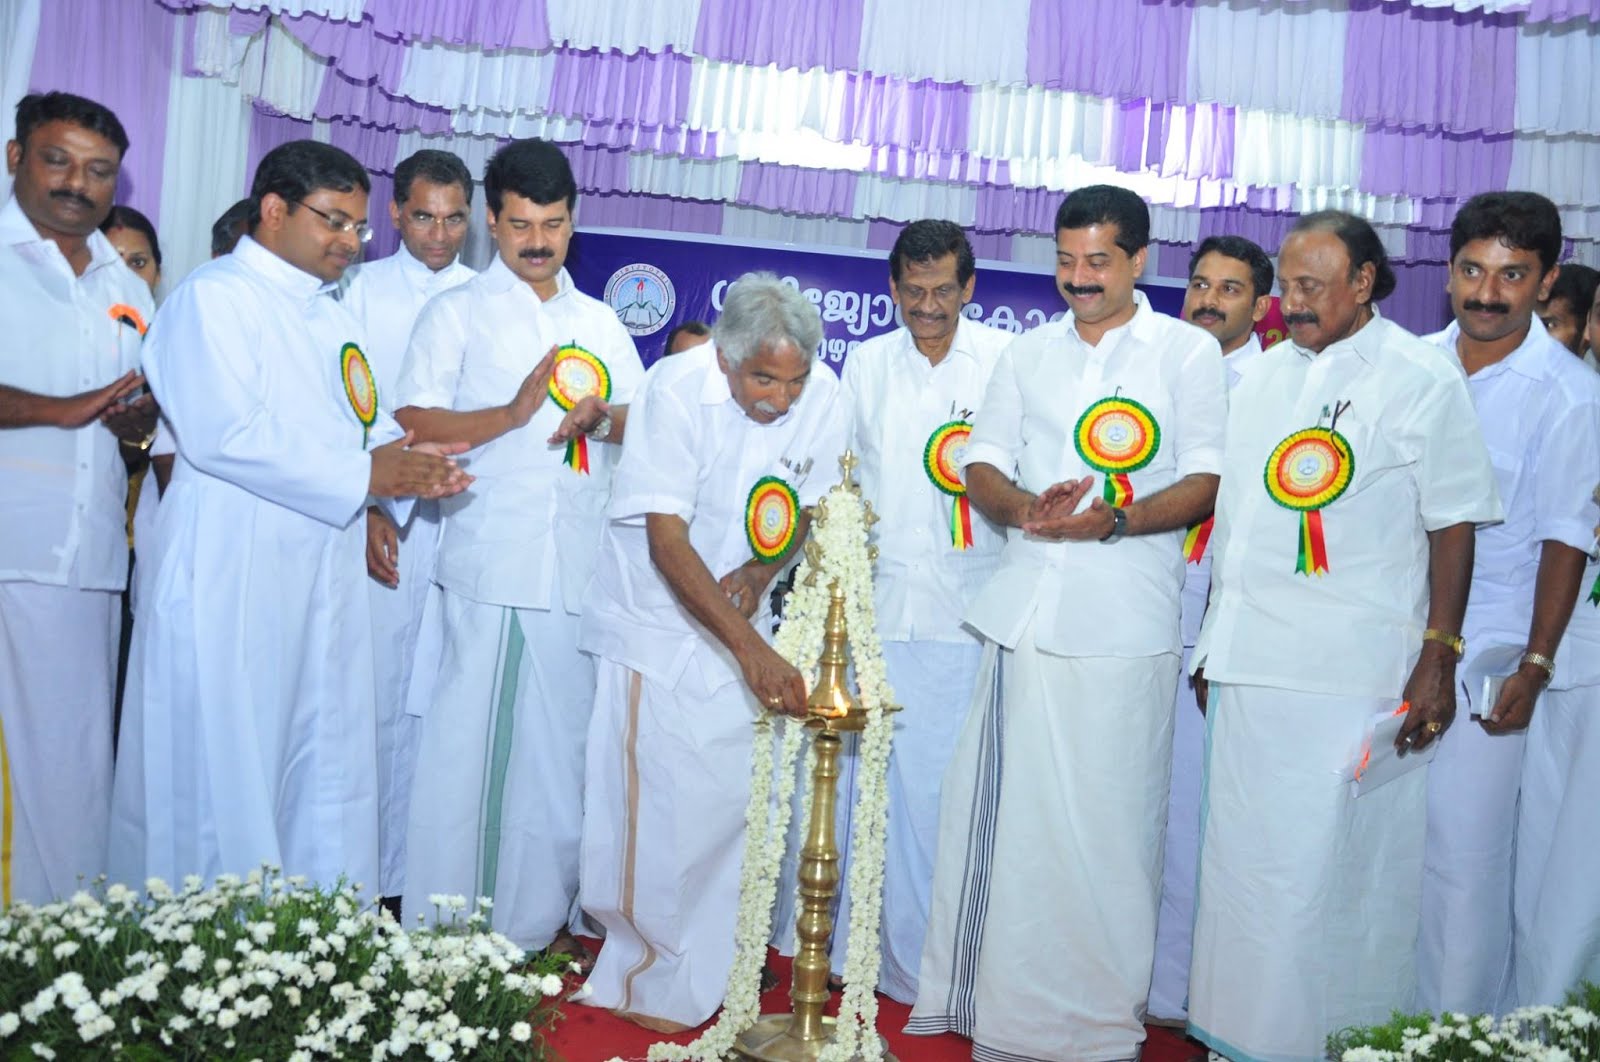 Inauguration by the Chief Minister